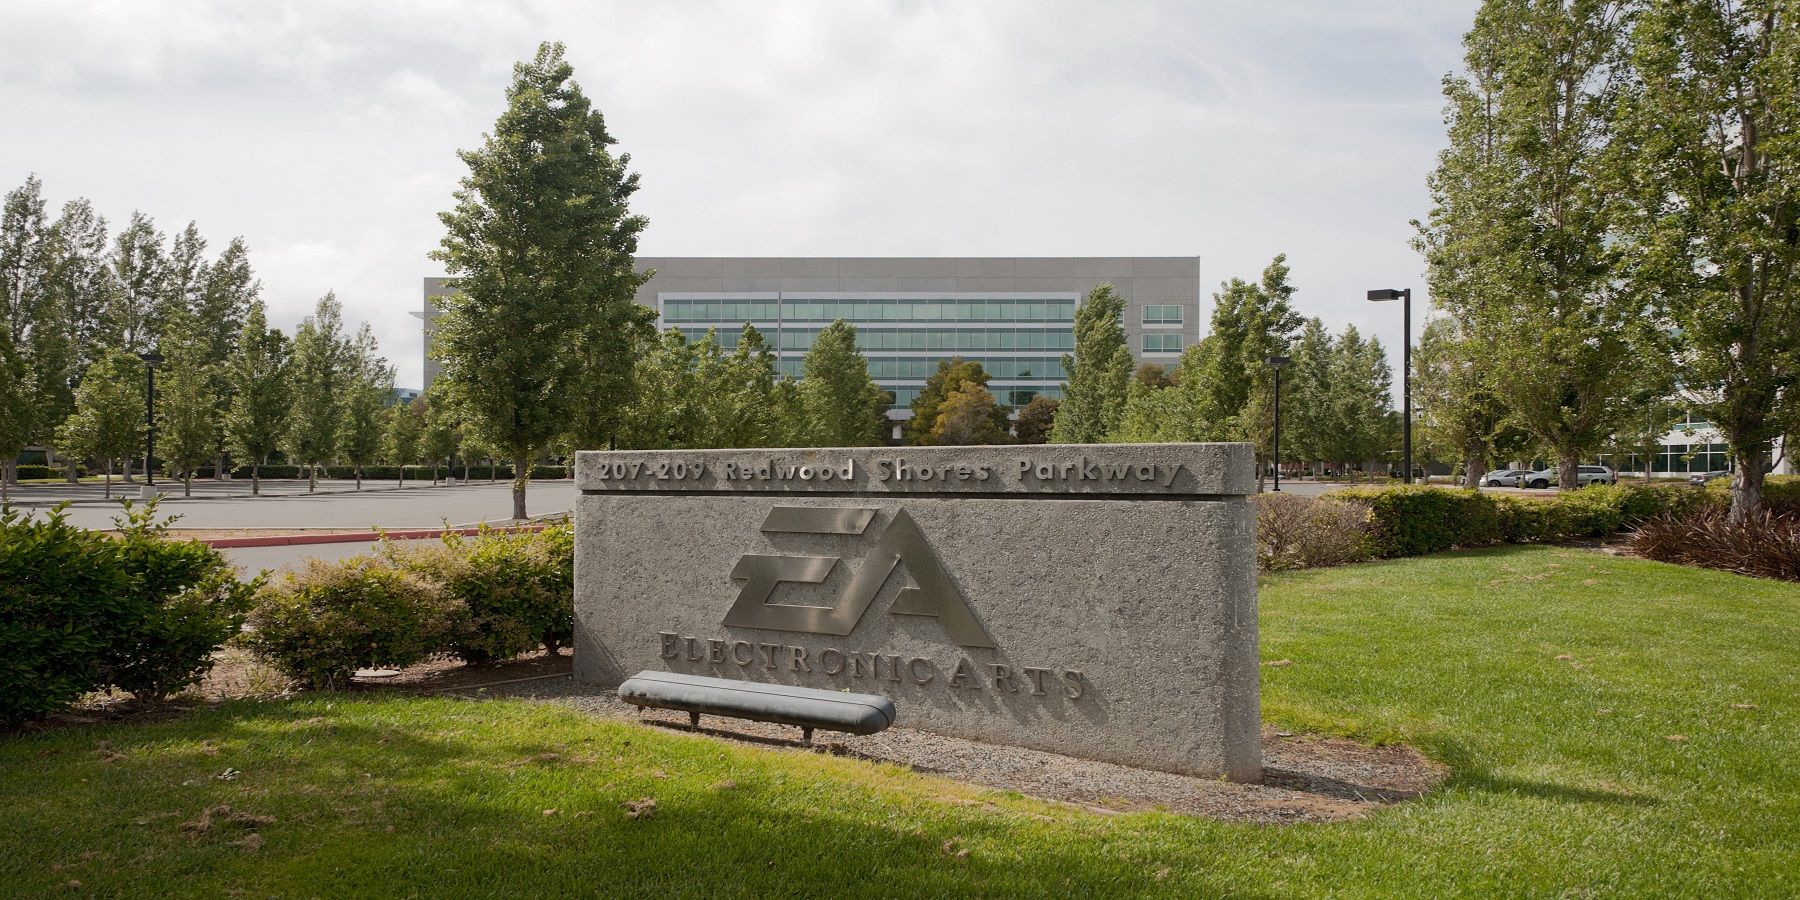 Halo co-creator Marcus Lehto is joining EA and will work out of Seattle.